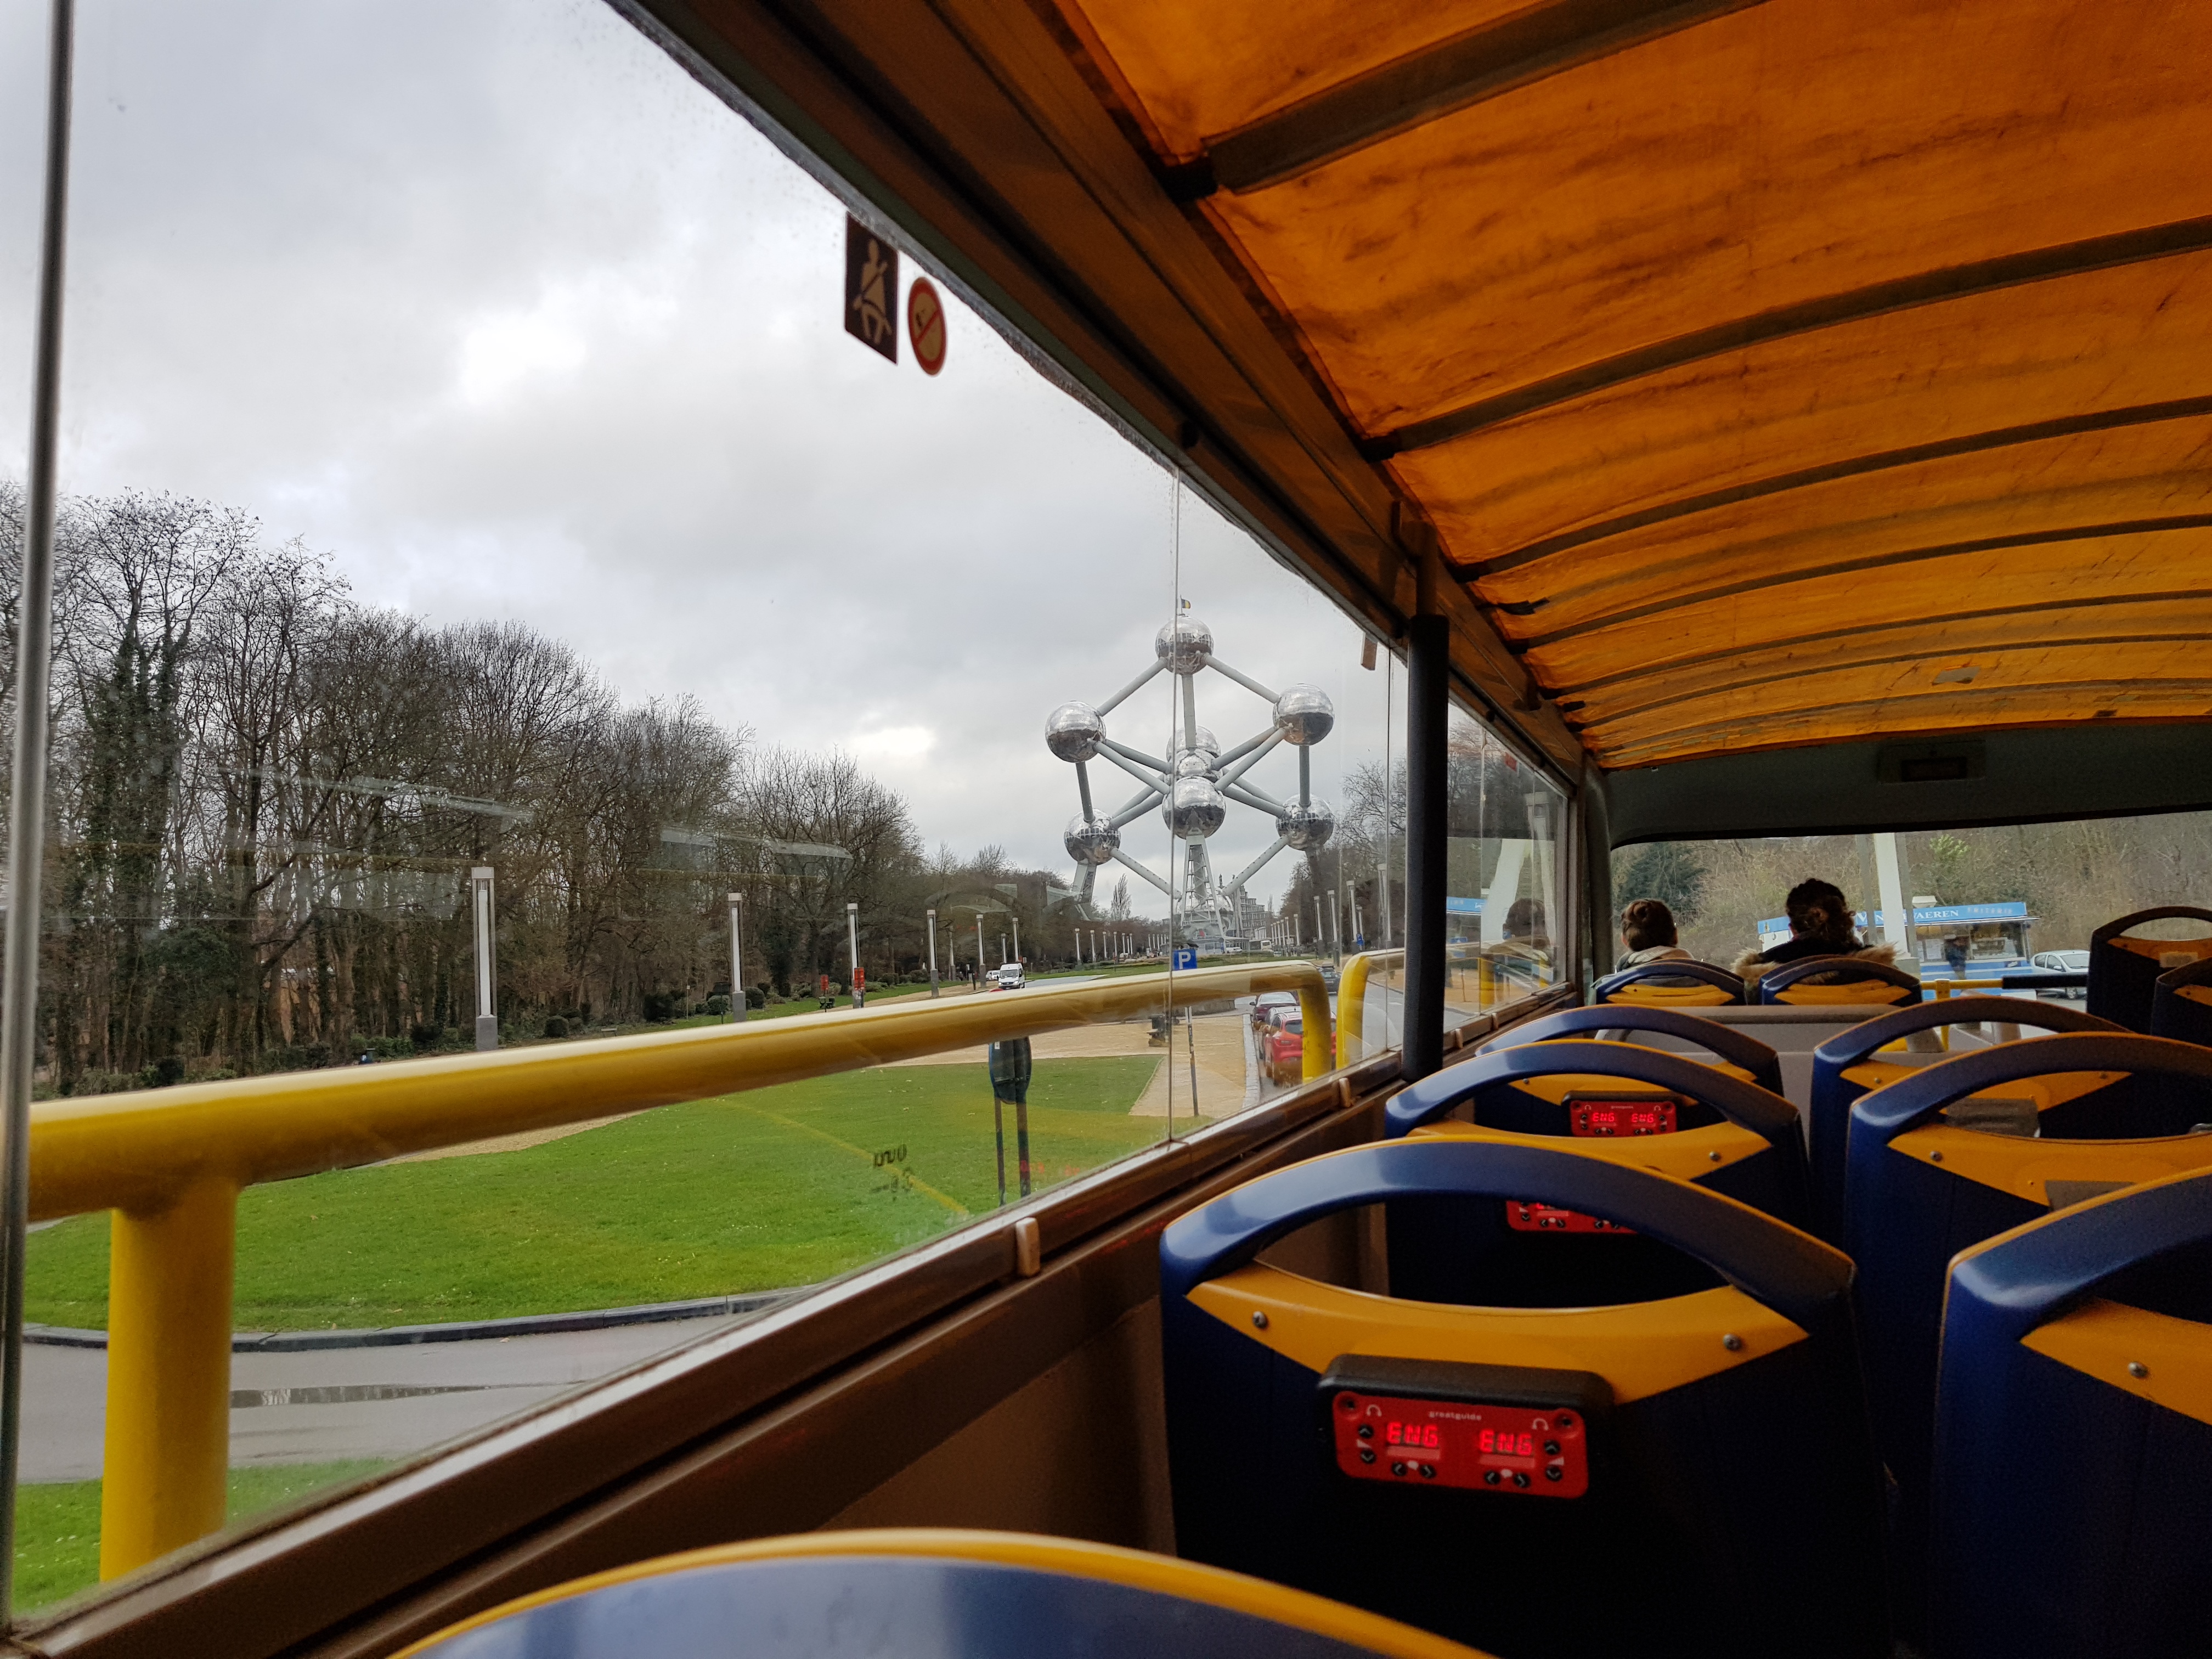 Inside of a double decker sightseeing bus with a view of the Atomium from the side. The Atomium is a large metal sculpture in the shape of an atom